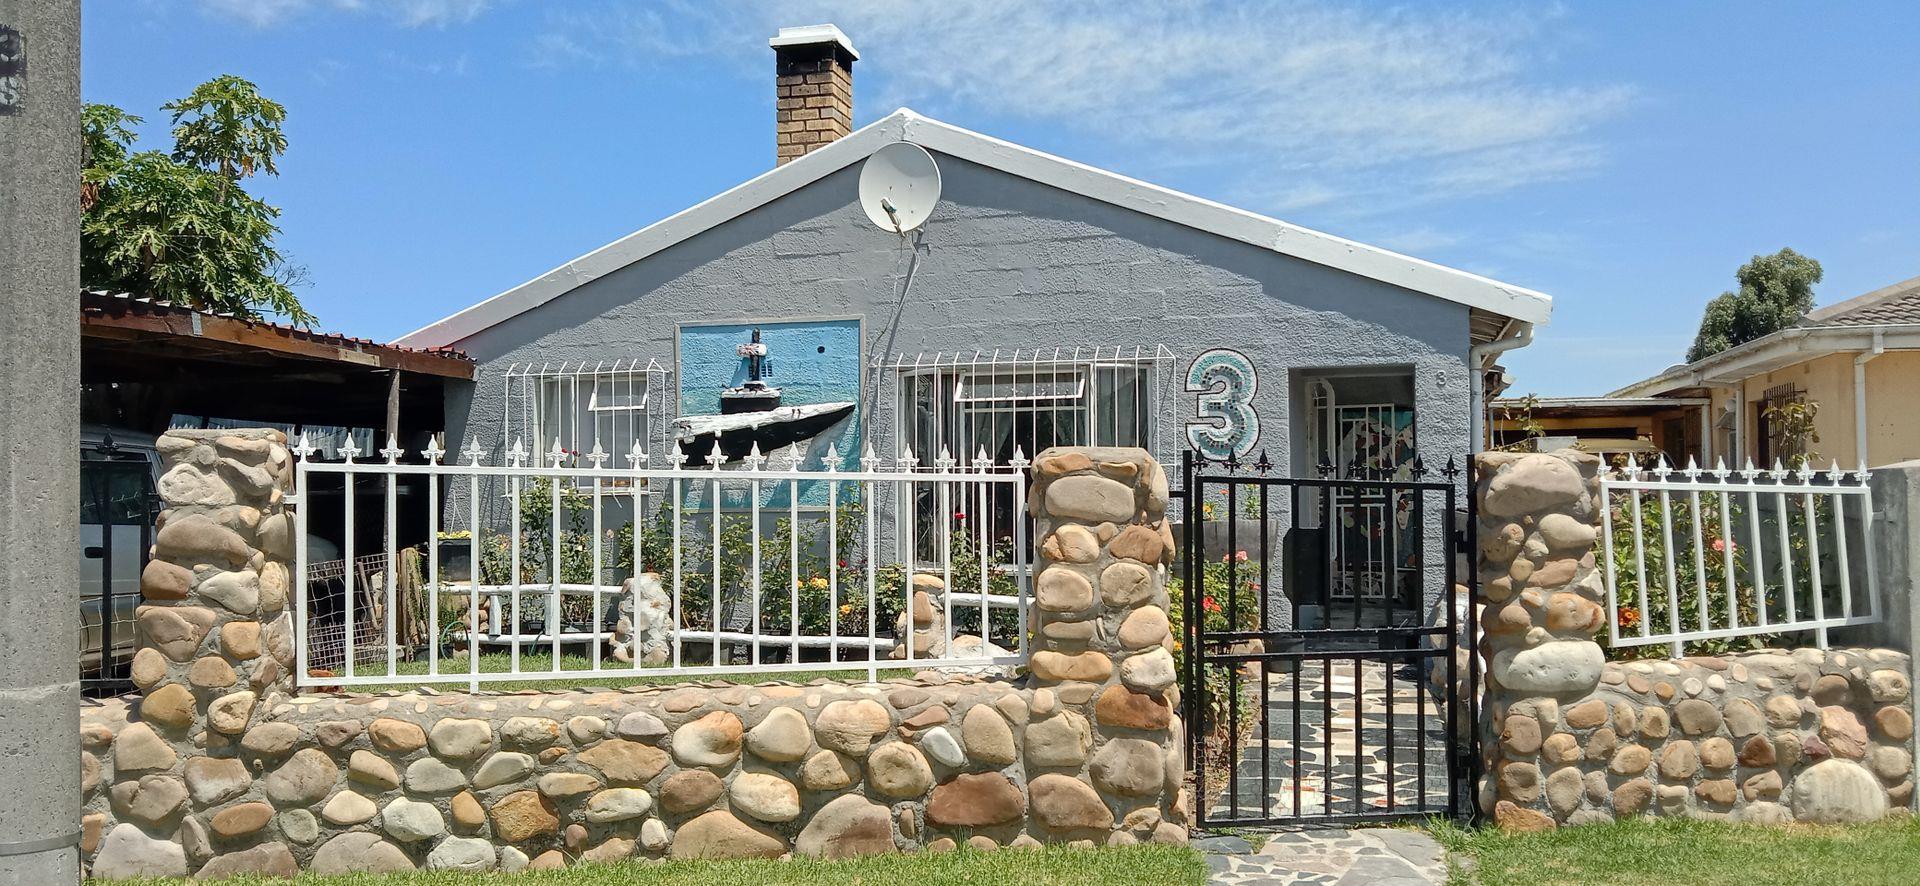 4 Bedroom Property for Sale in Beverly Park Western Cape